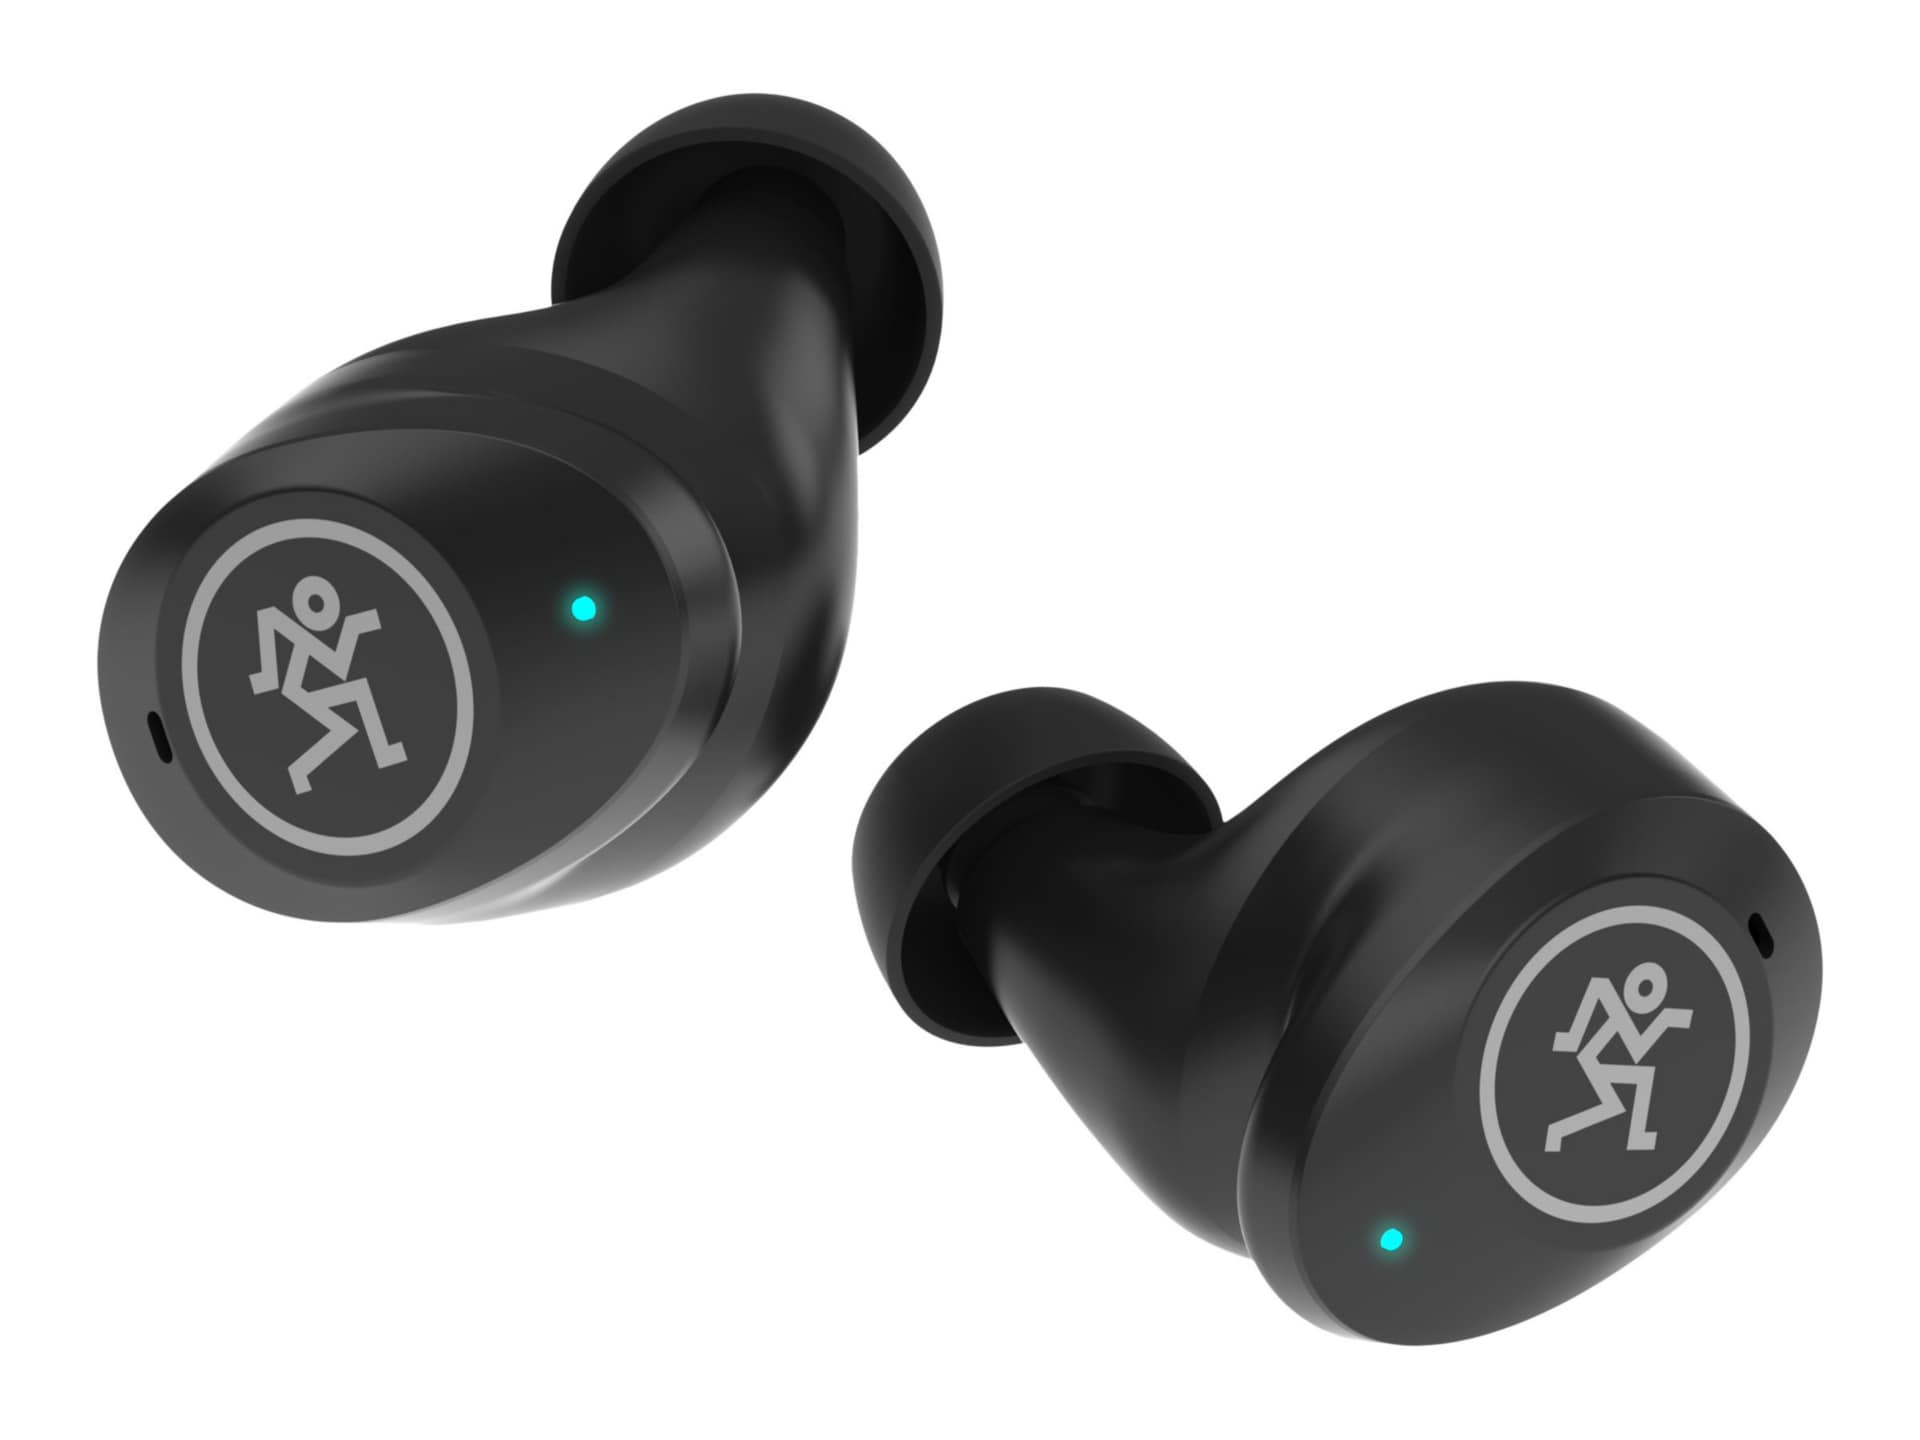 Mackie MP-20TWS True Wireless Dual-Driver Earbuds with ANC